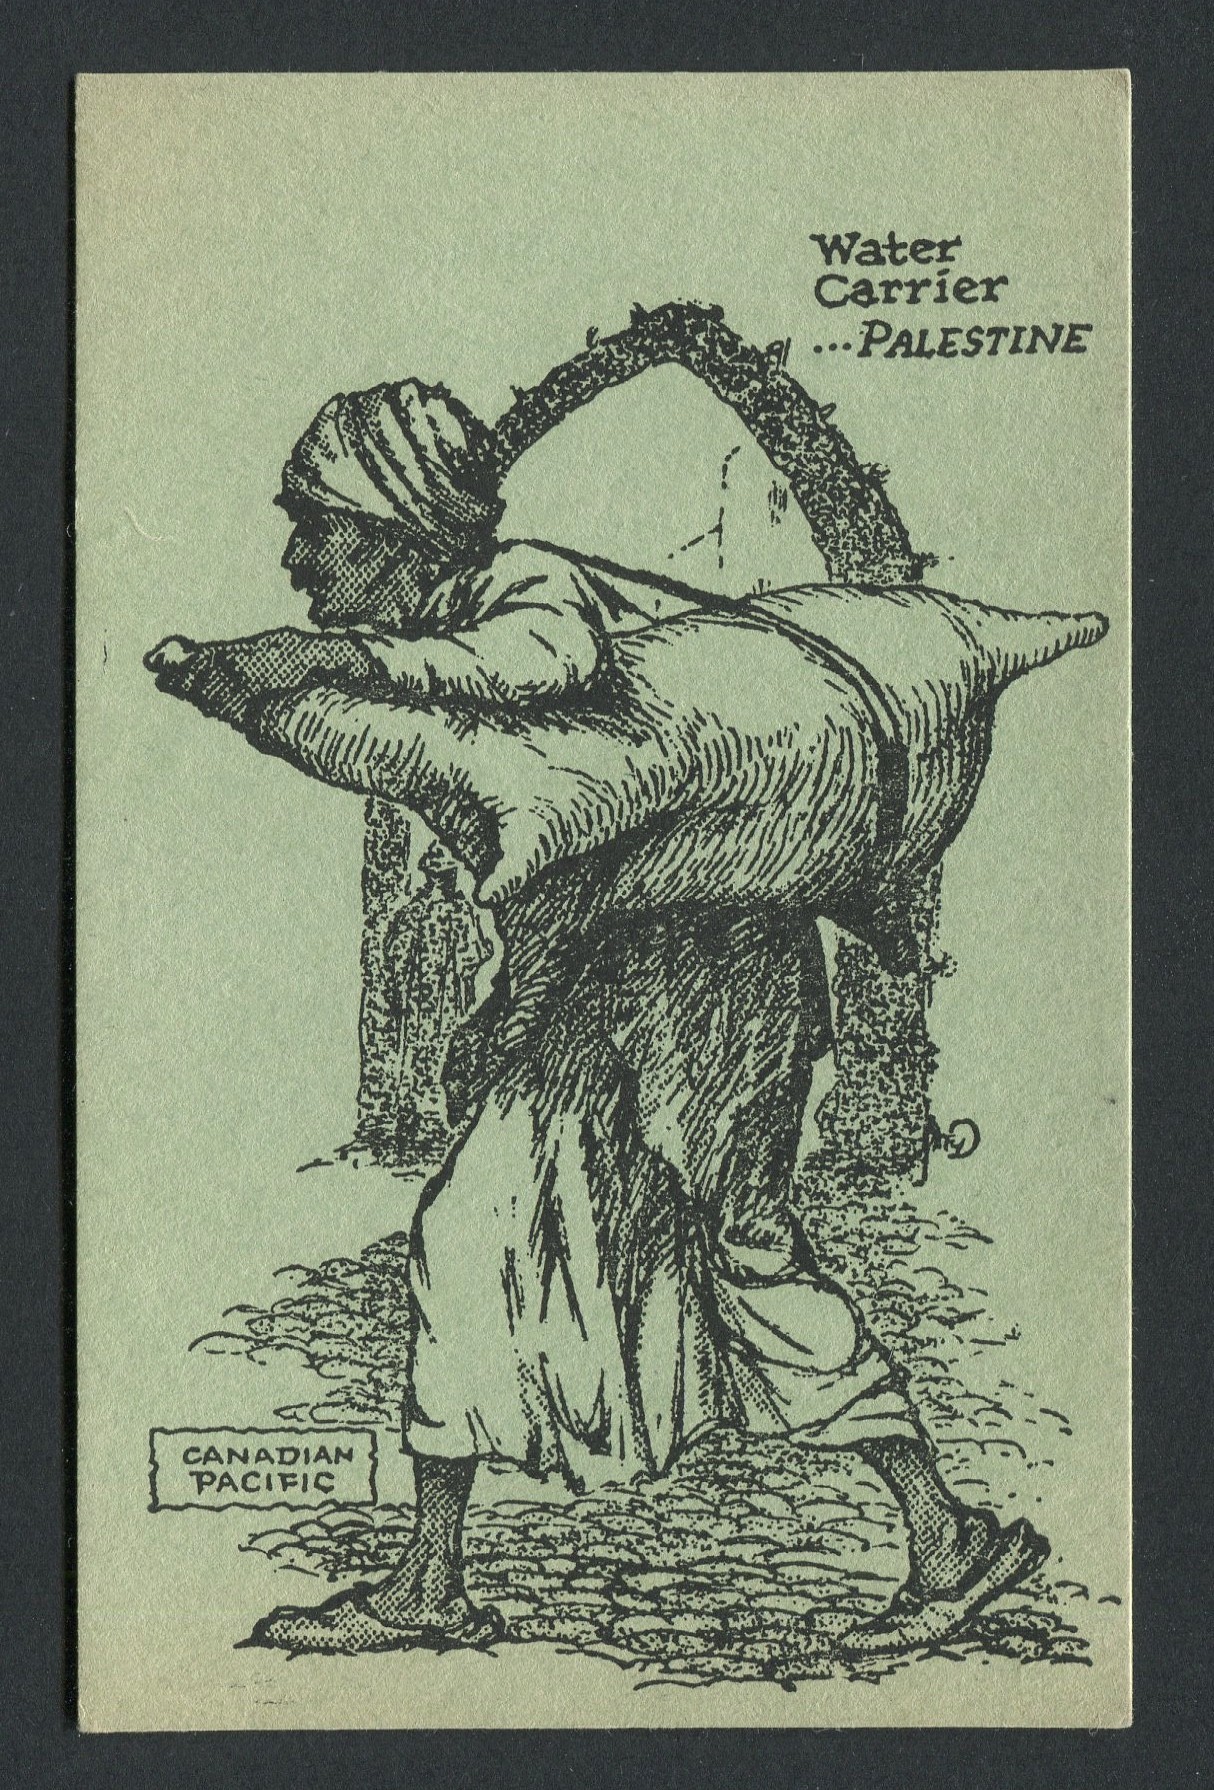 WATER CARRIER PALESTINE CANADIAN PACIFIC ROUND THE WORLD CRUISE POSTCARD MEMOGRAM